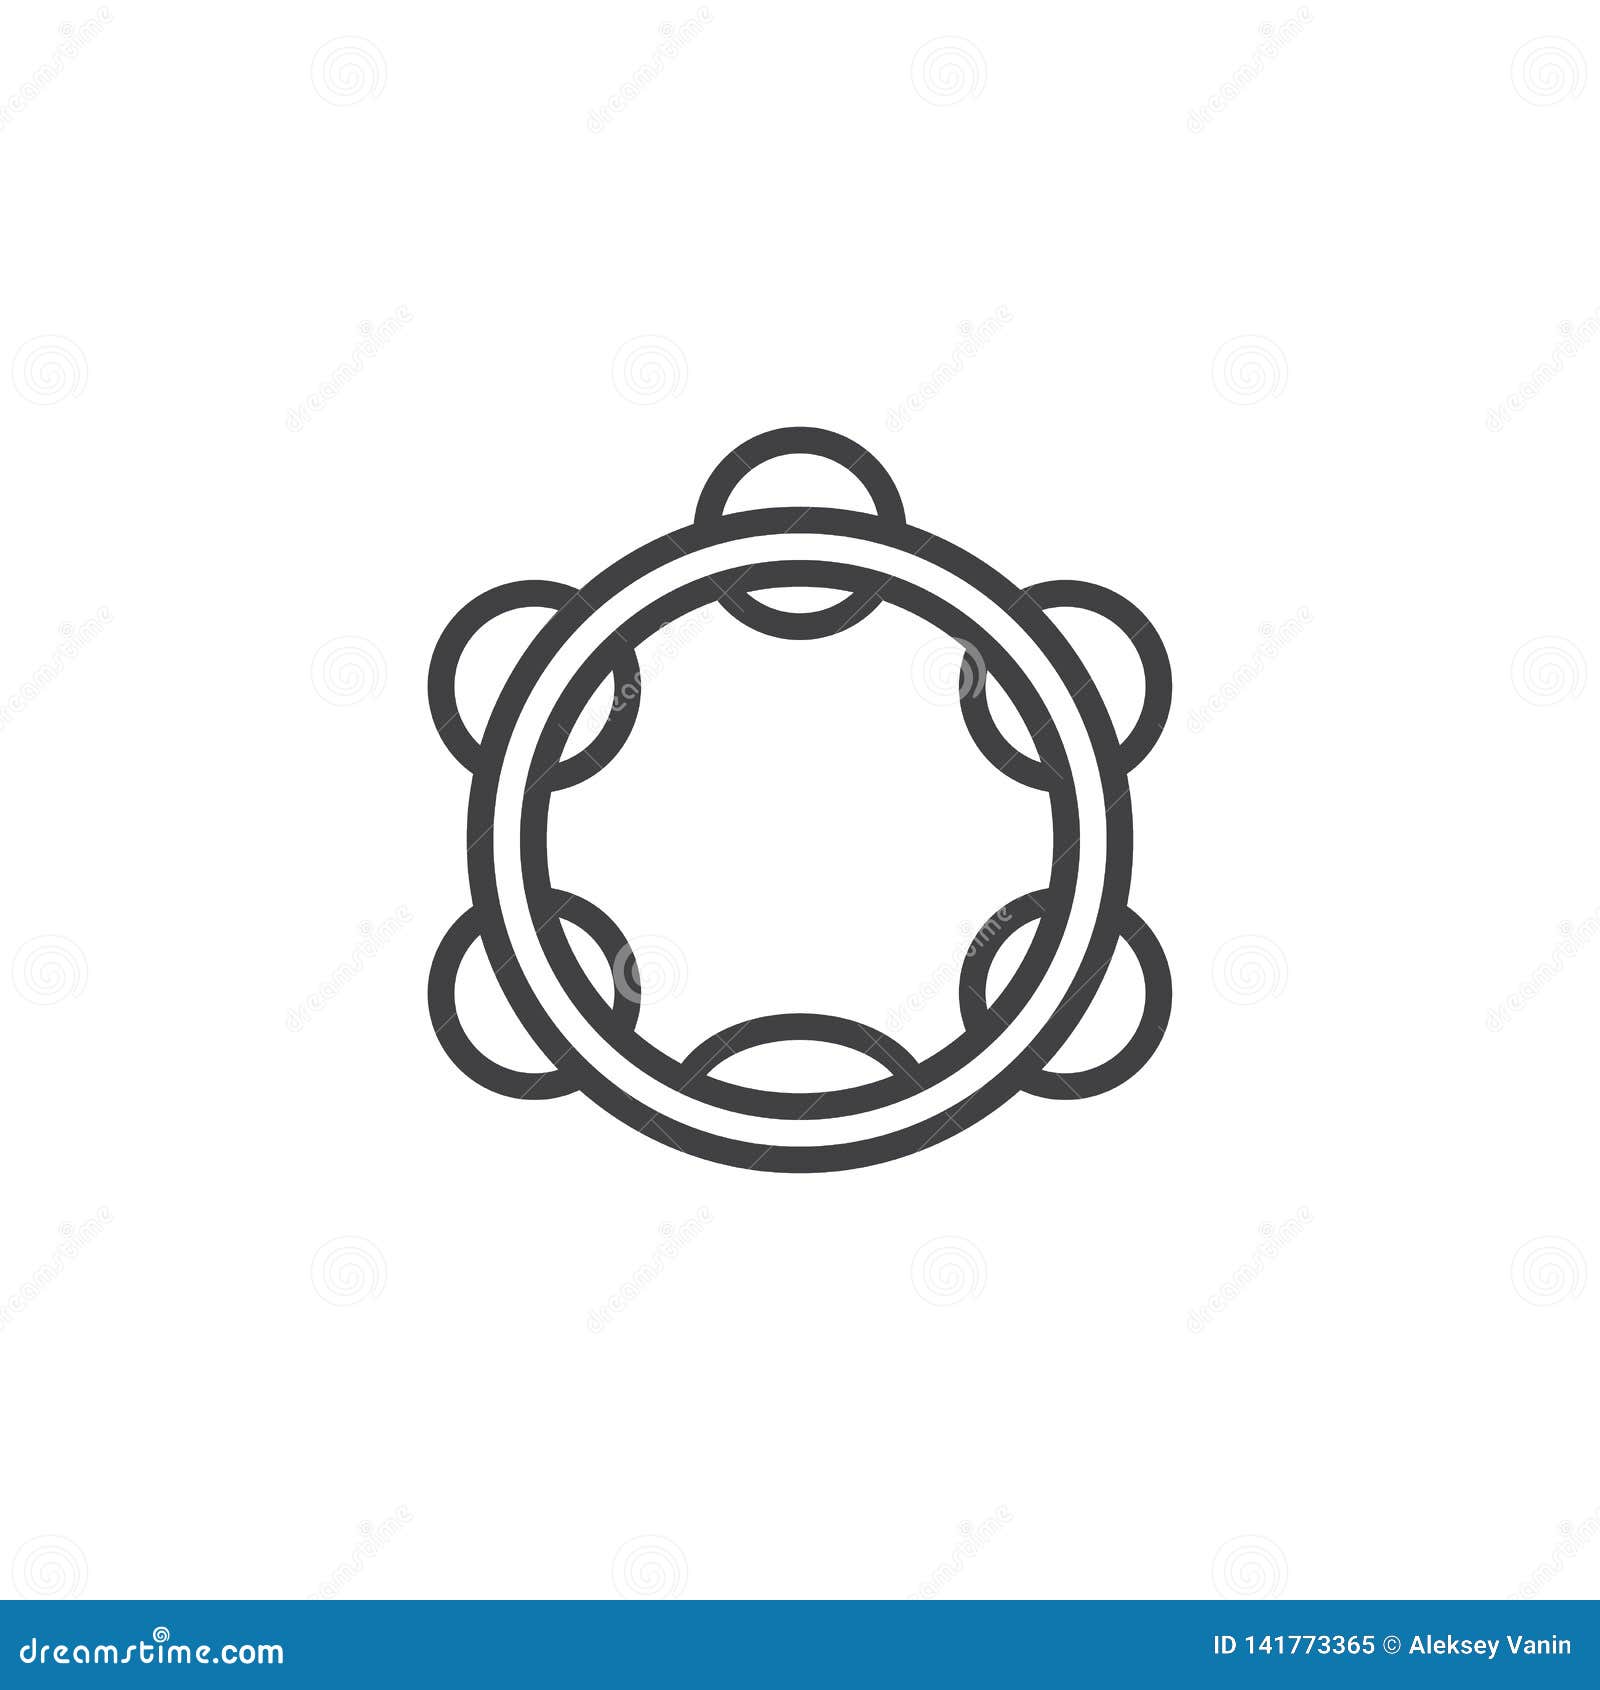 Tambourine line icon stock vector. Illustration of outline - 141773365